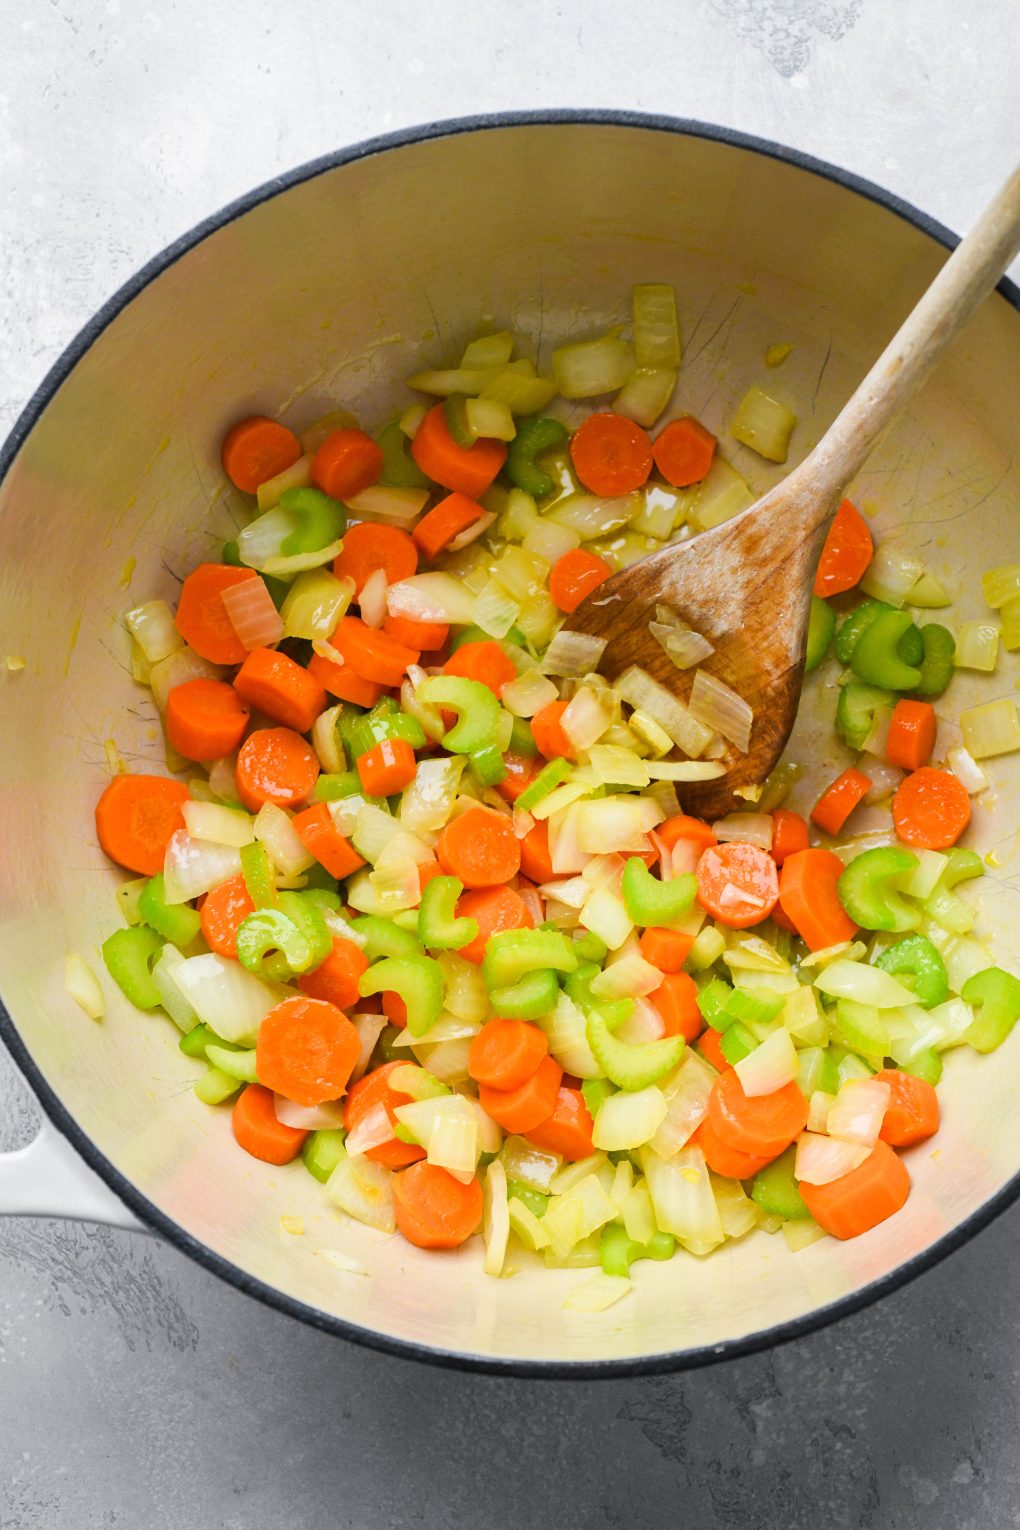 How to make anti inflammatory vegetable soup - Diced onions, carrots, and celery sauteed in a large ceramic soup pot with olive oil. 